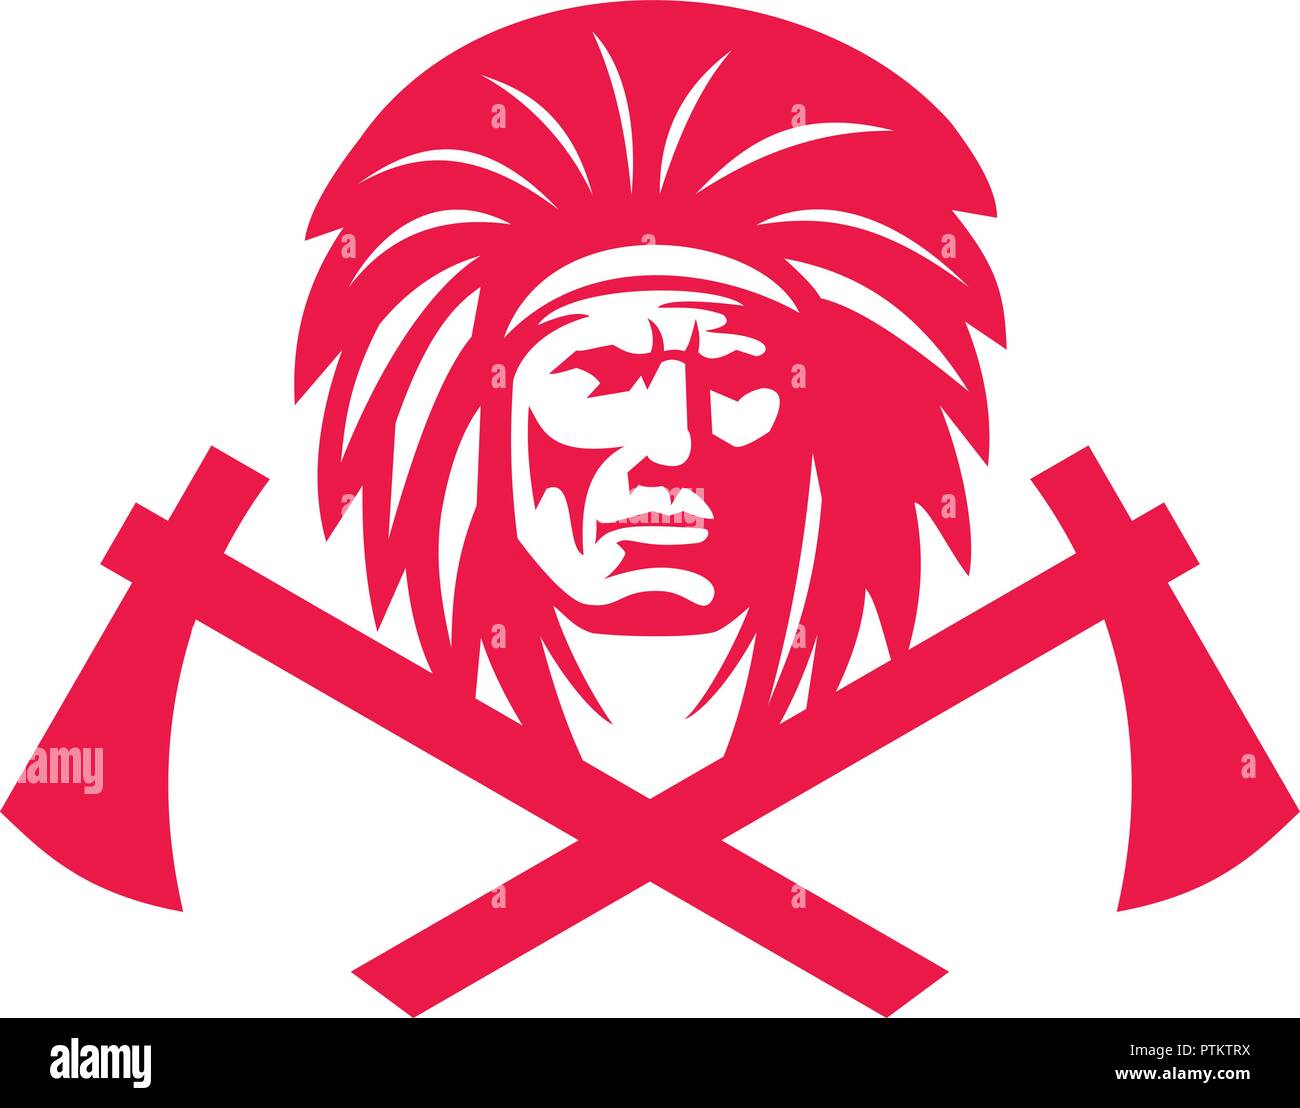 Mascot icon illustration of head of a Native American Indian wearing headdress with crossed tomahawk viewed from front on isolated background in retro Stock Vector